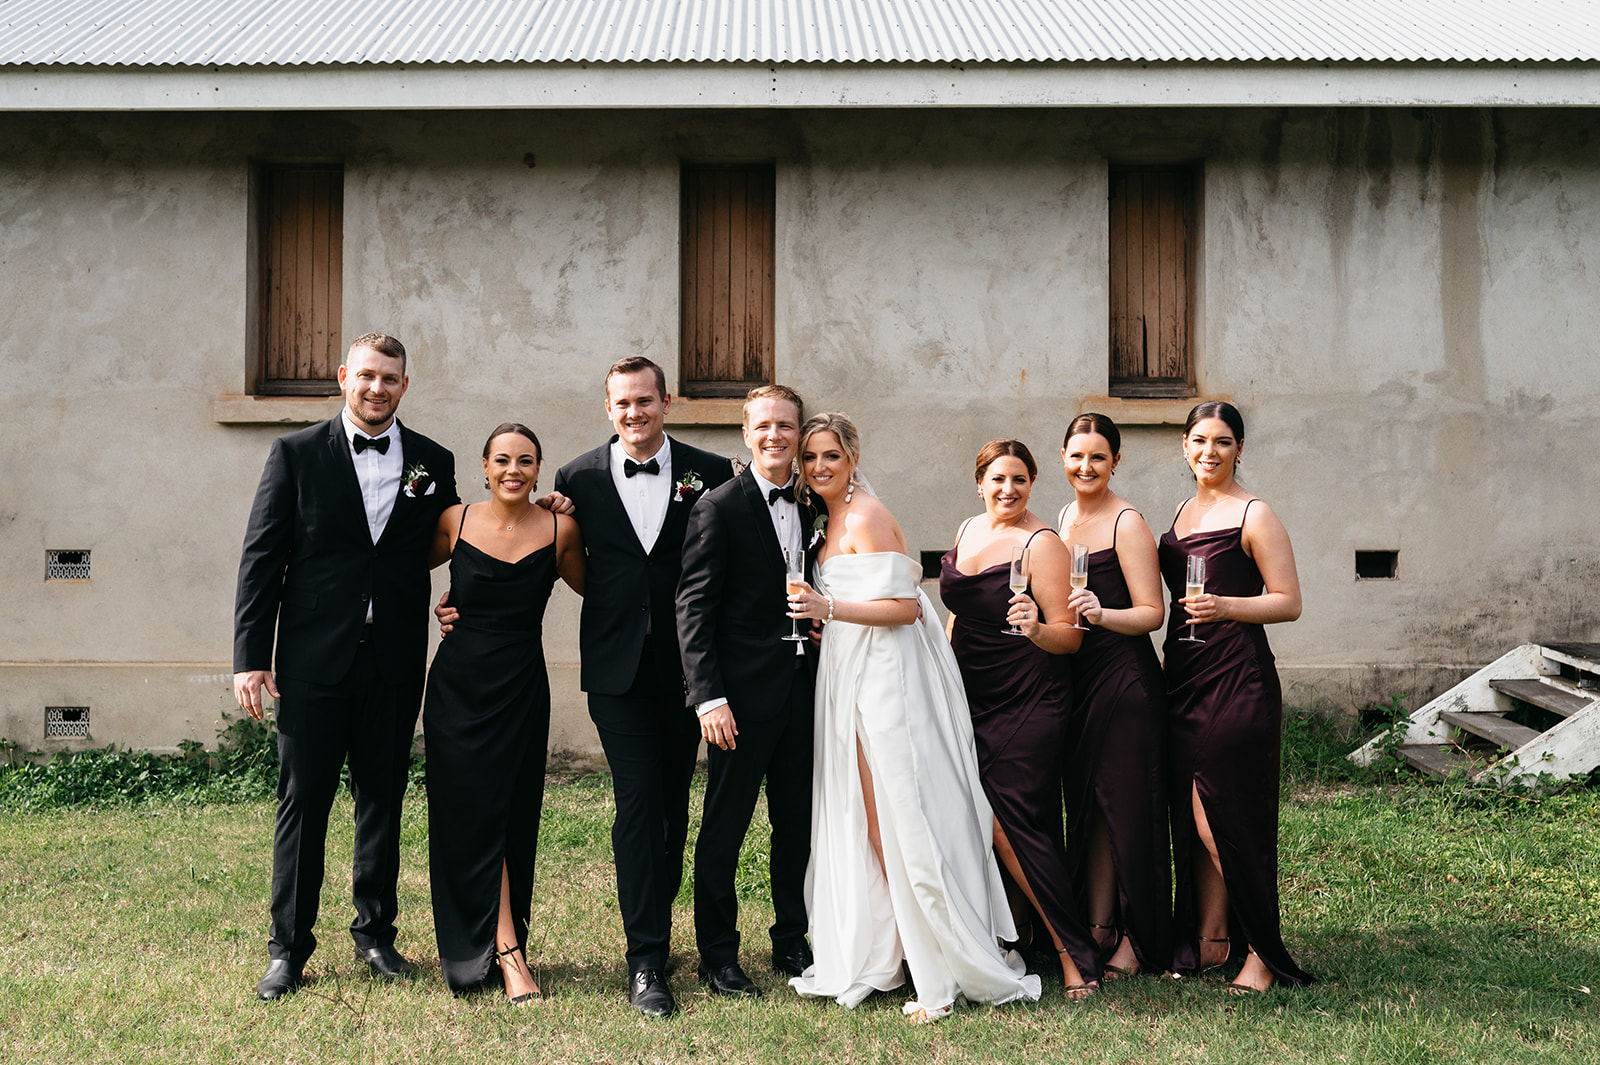 Bridal party photos in Cairns and celebrating with bride and groom